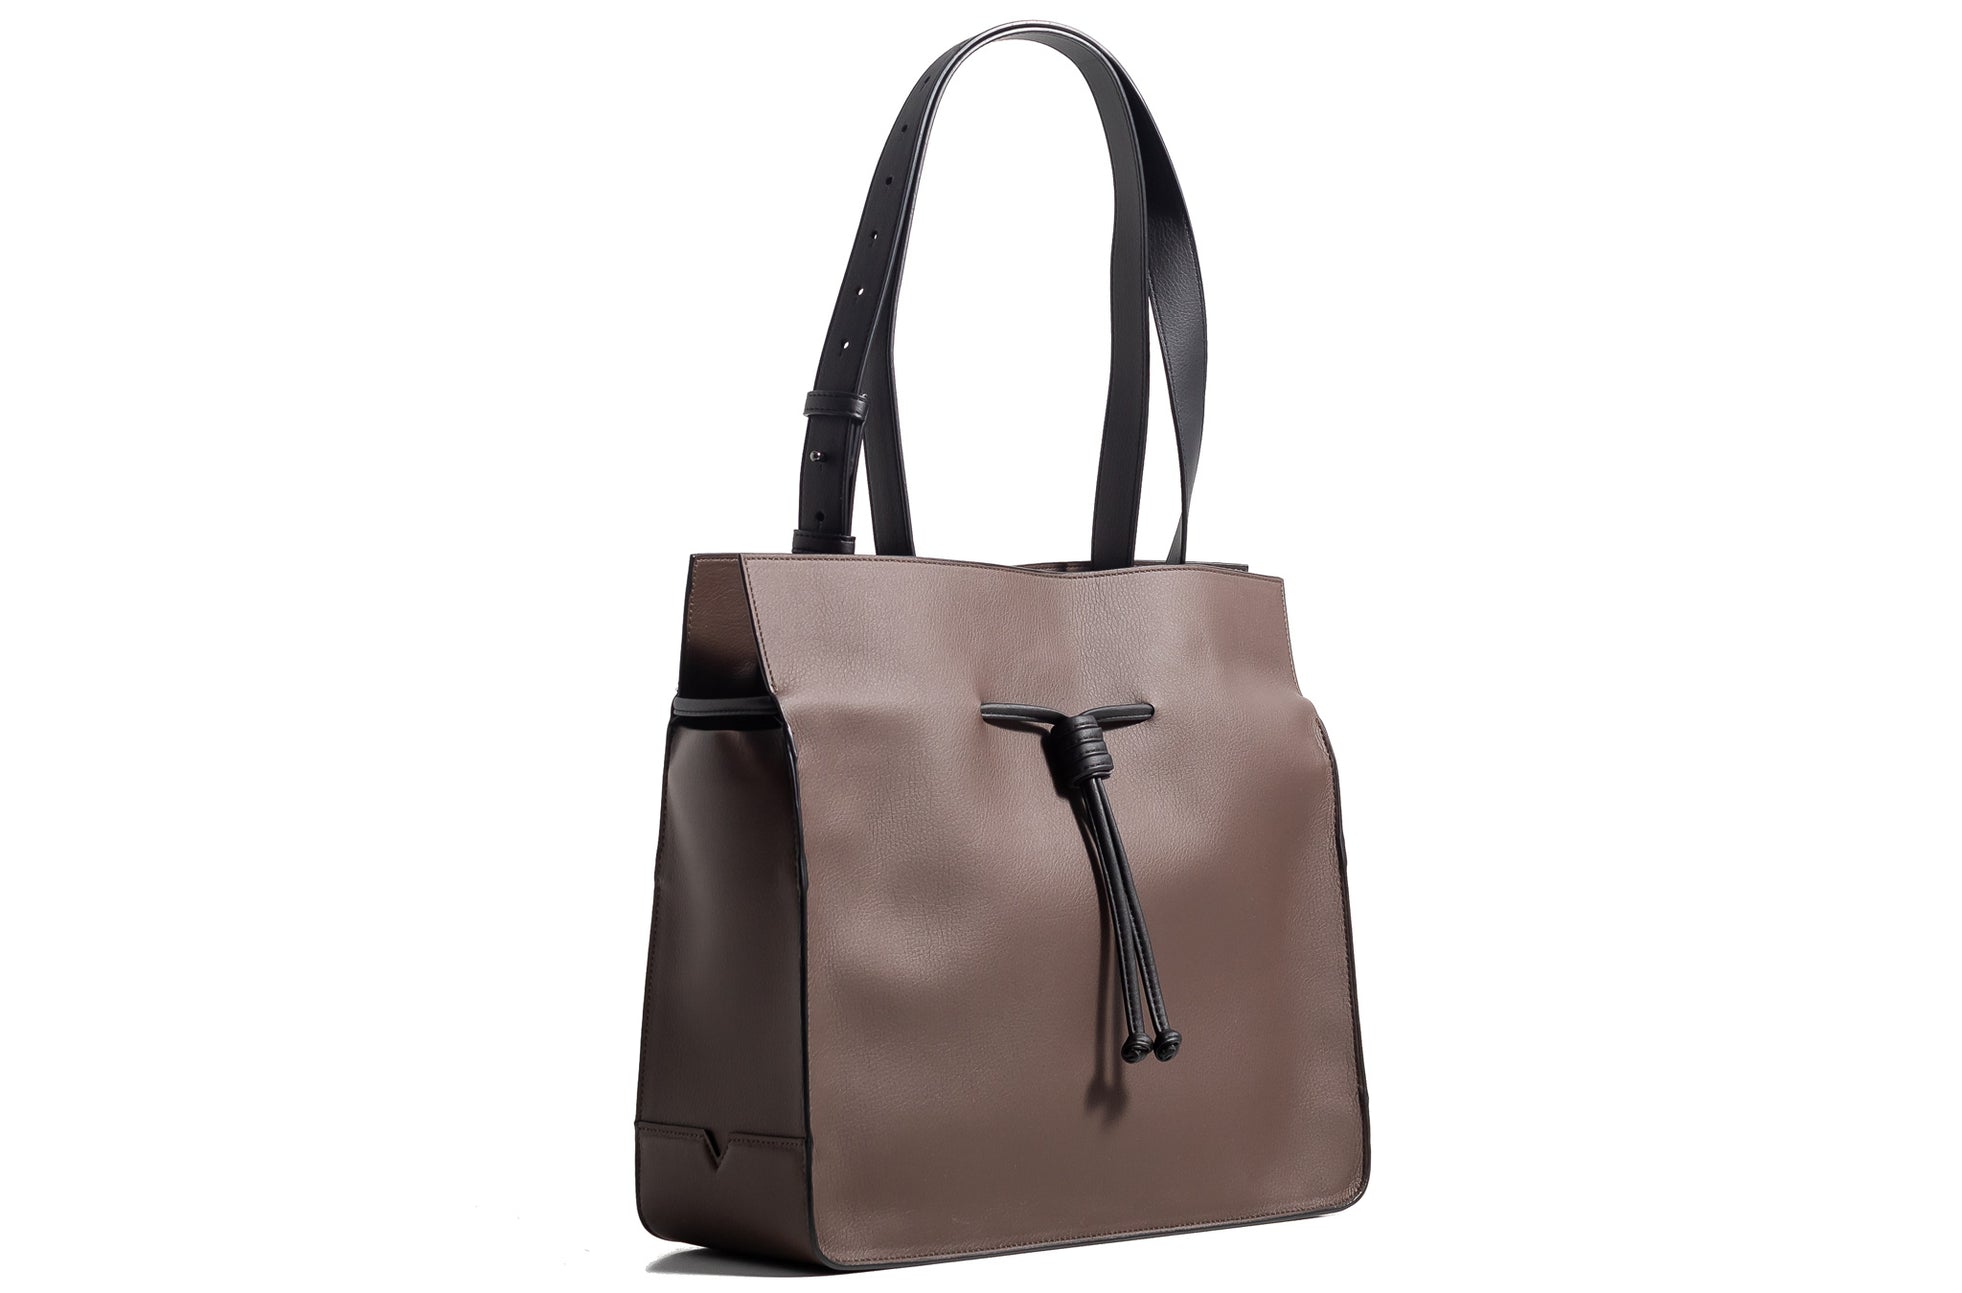 The Medium Shopper in Technik in Taupe and Black image 4